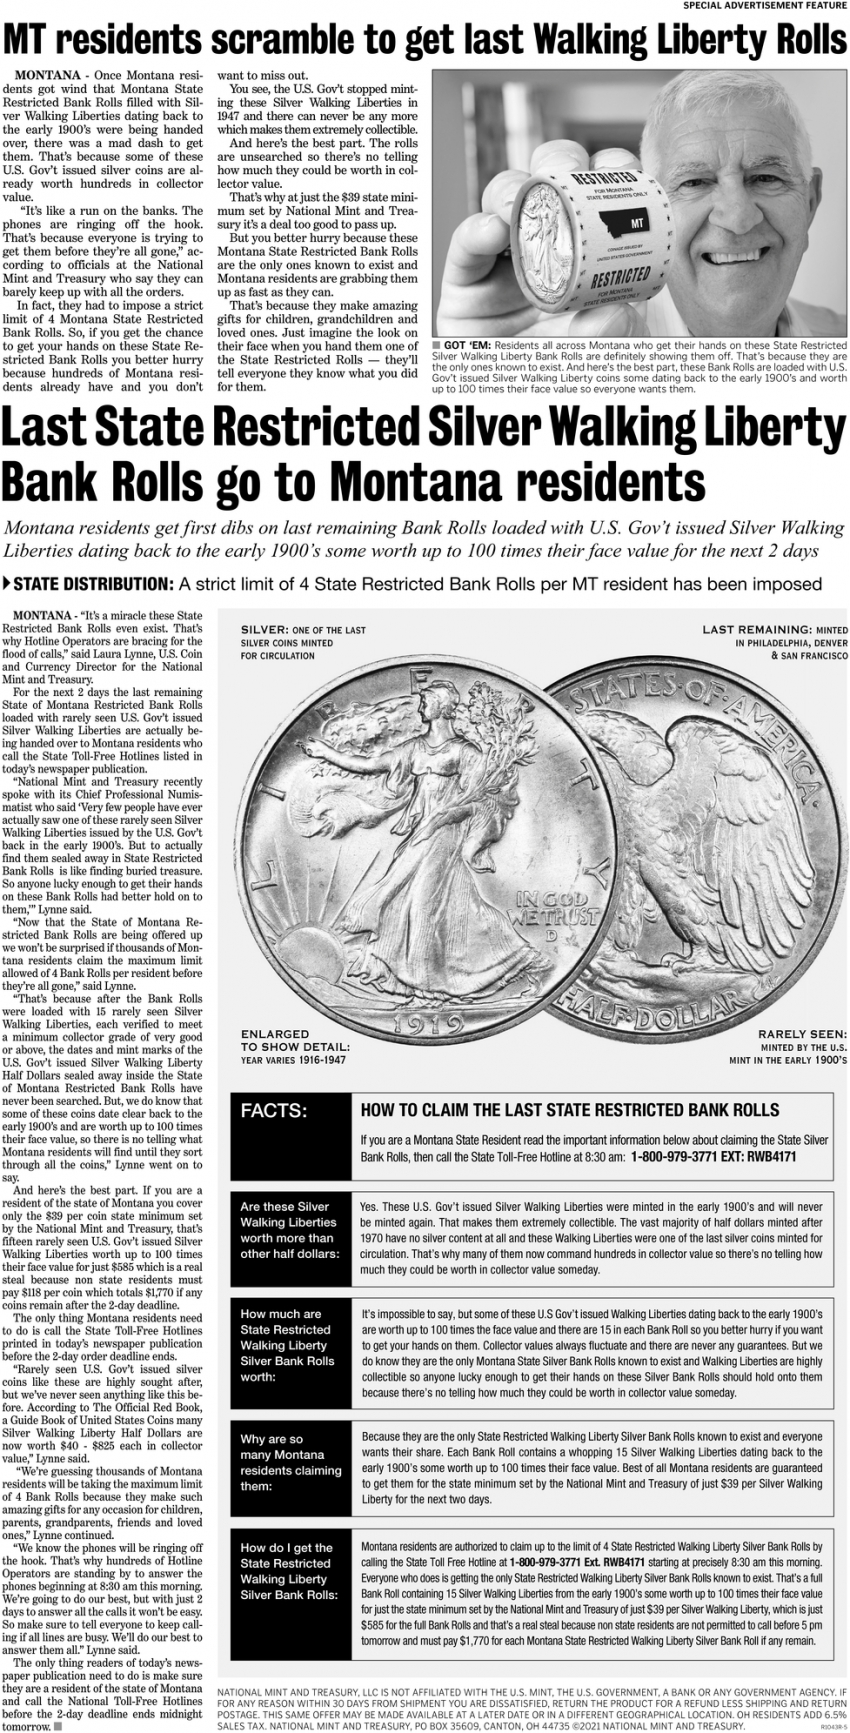 Last State Restricted Silver Walking Liberty Bank Rolls Go To Montana Residents